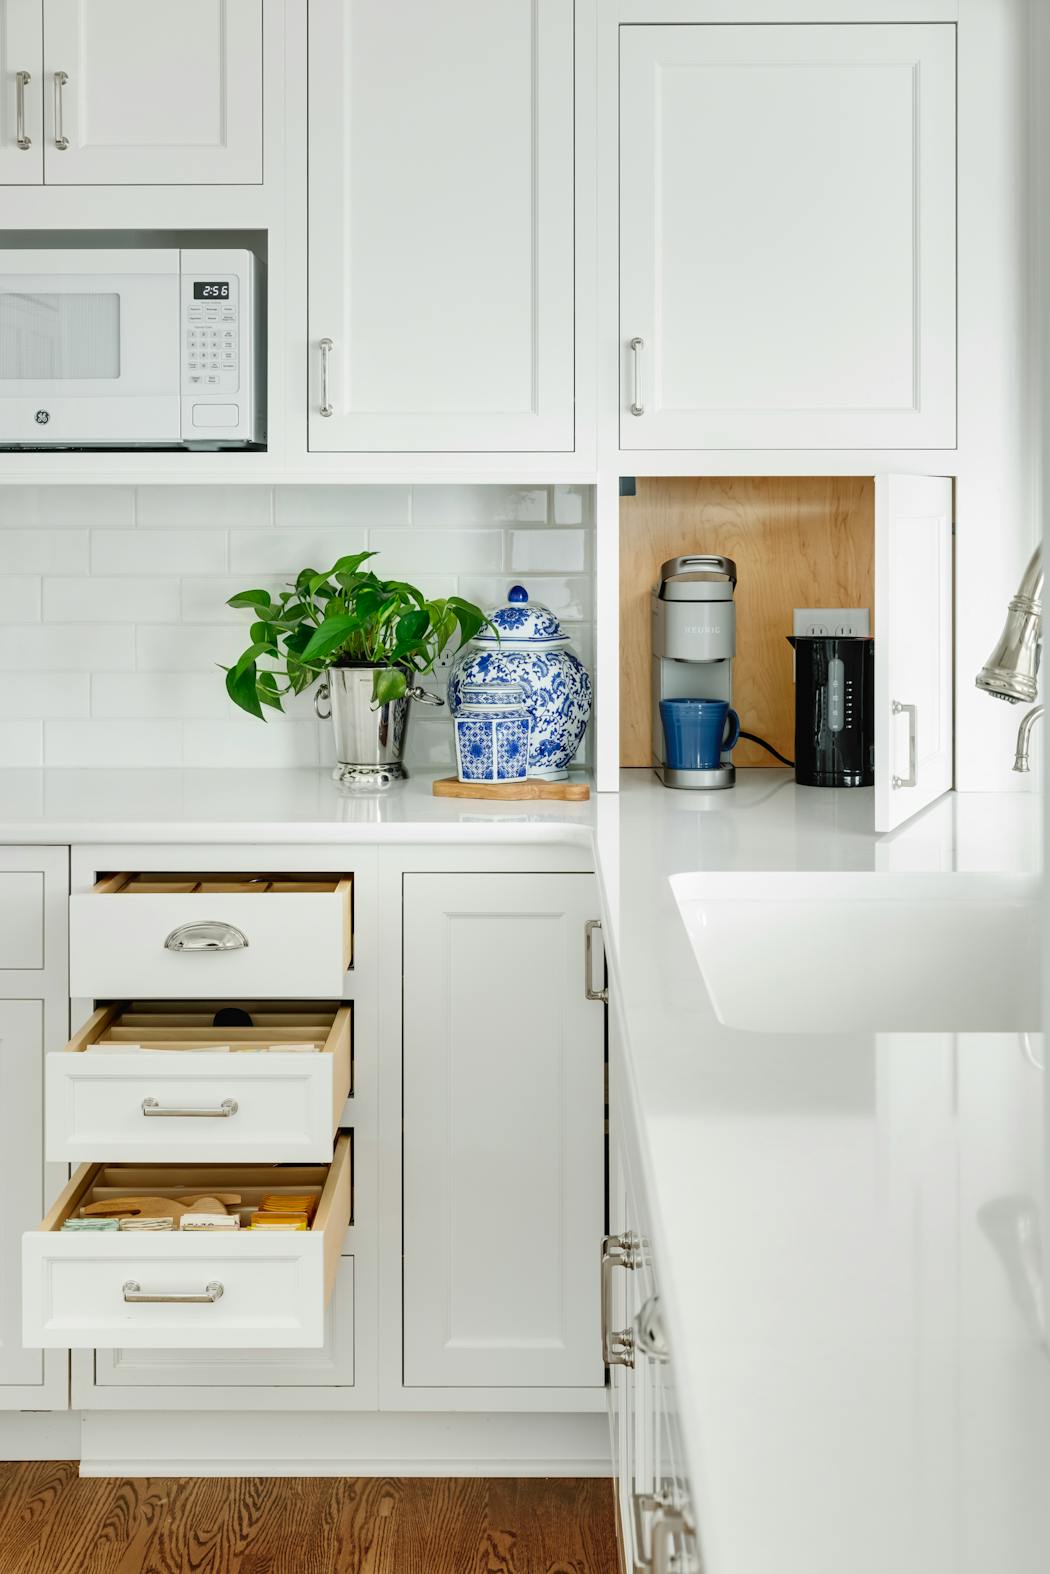 The homeowners love coffee and tea, and cabinets and drawers make it easy to make a cup while keeping things tucked away.